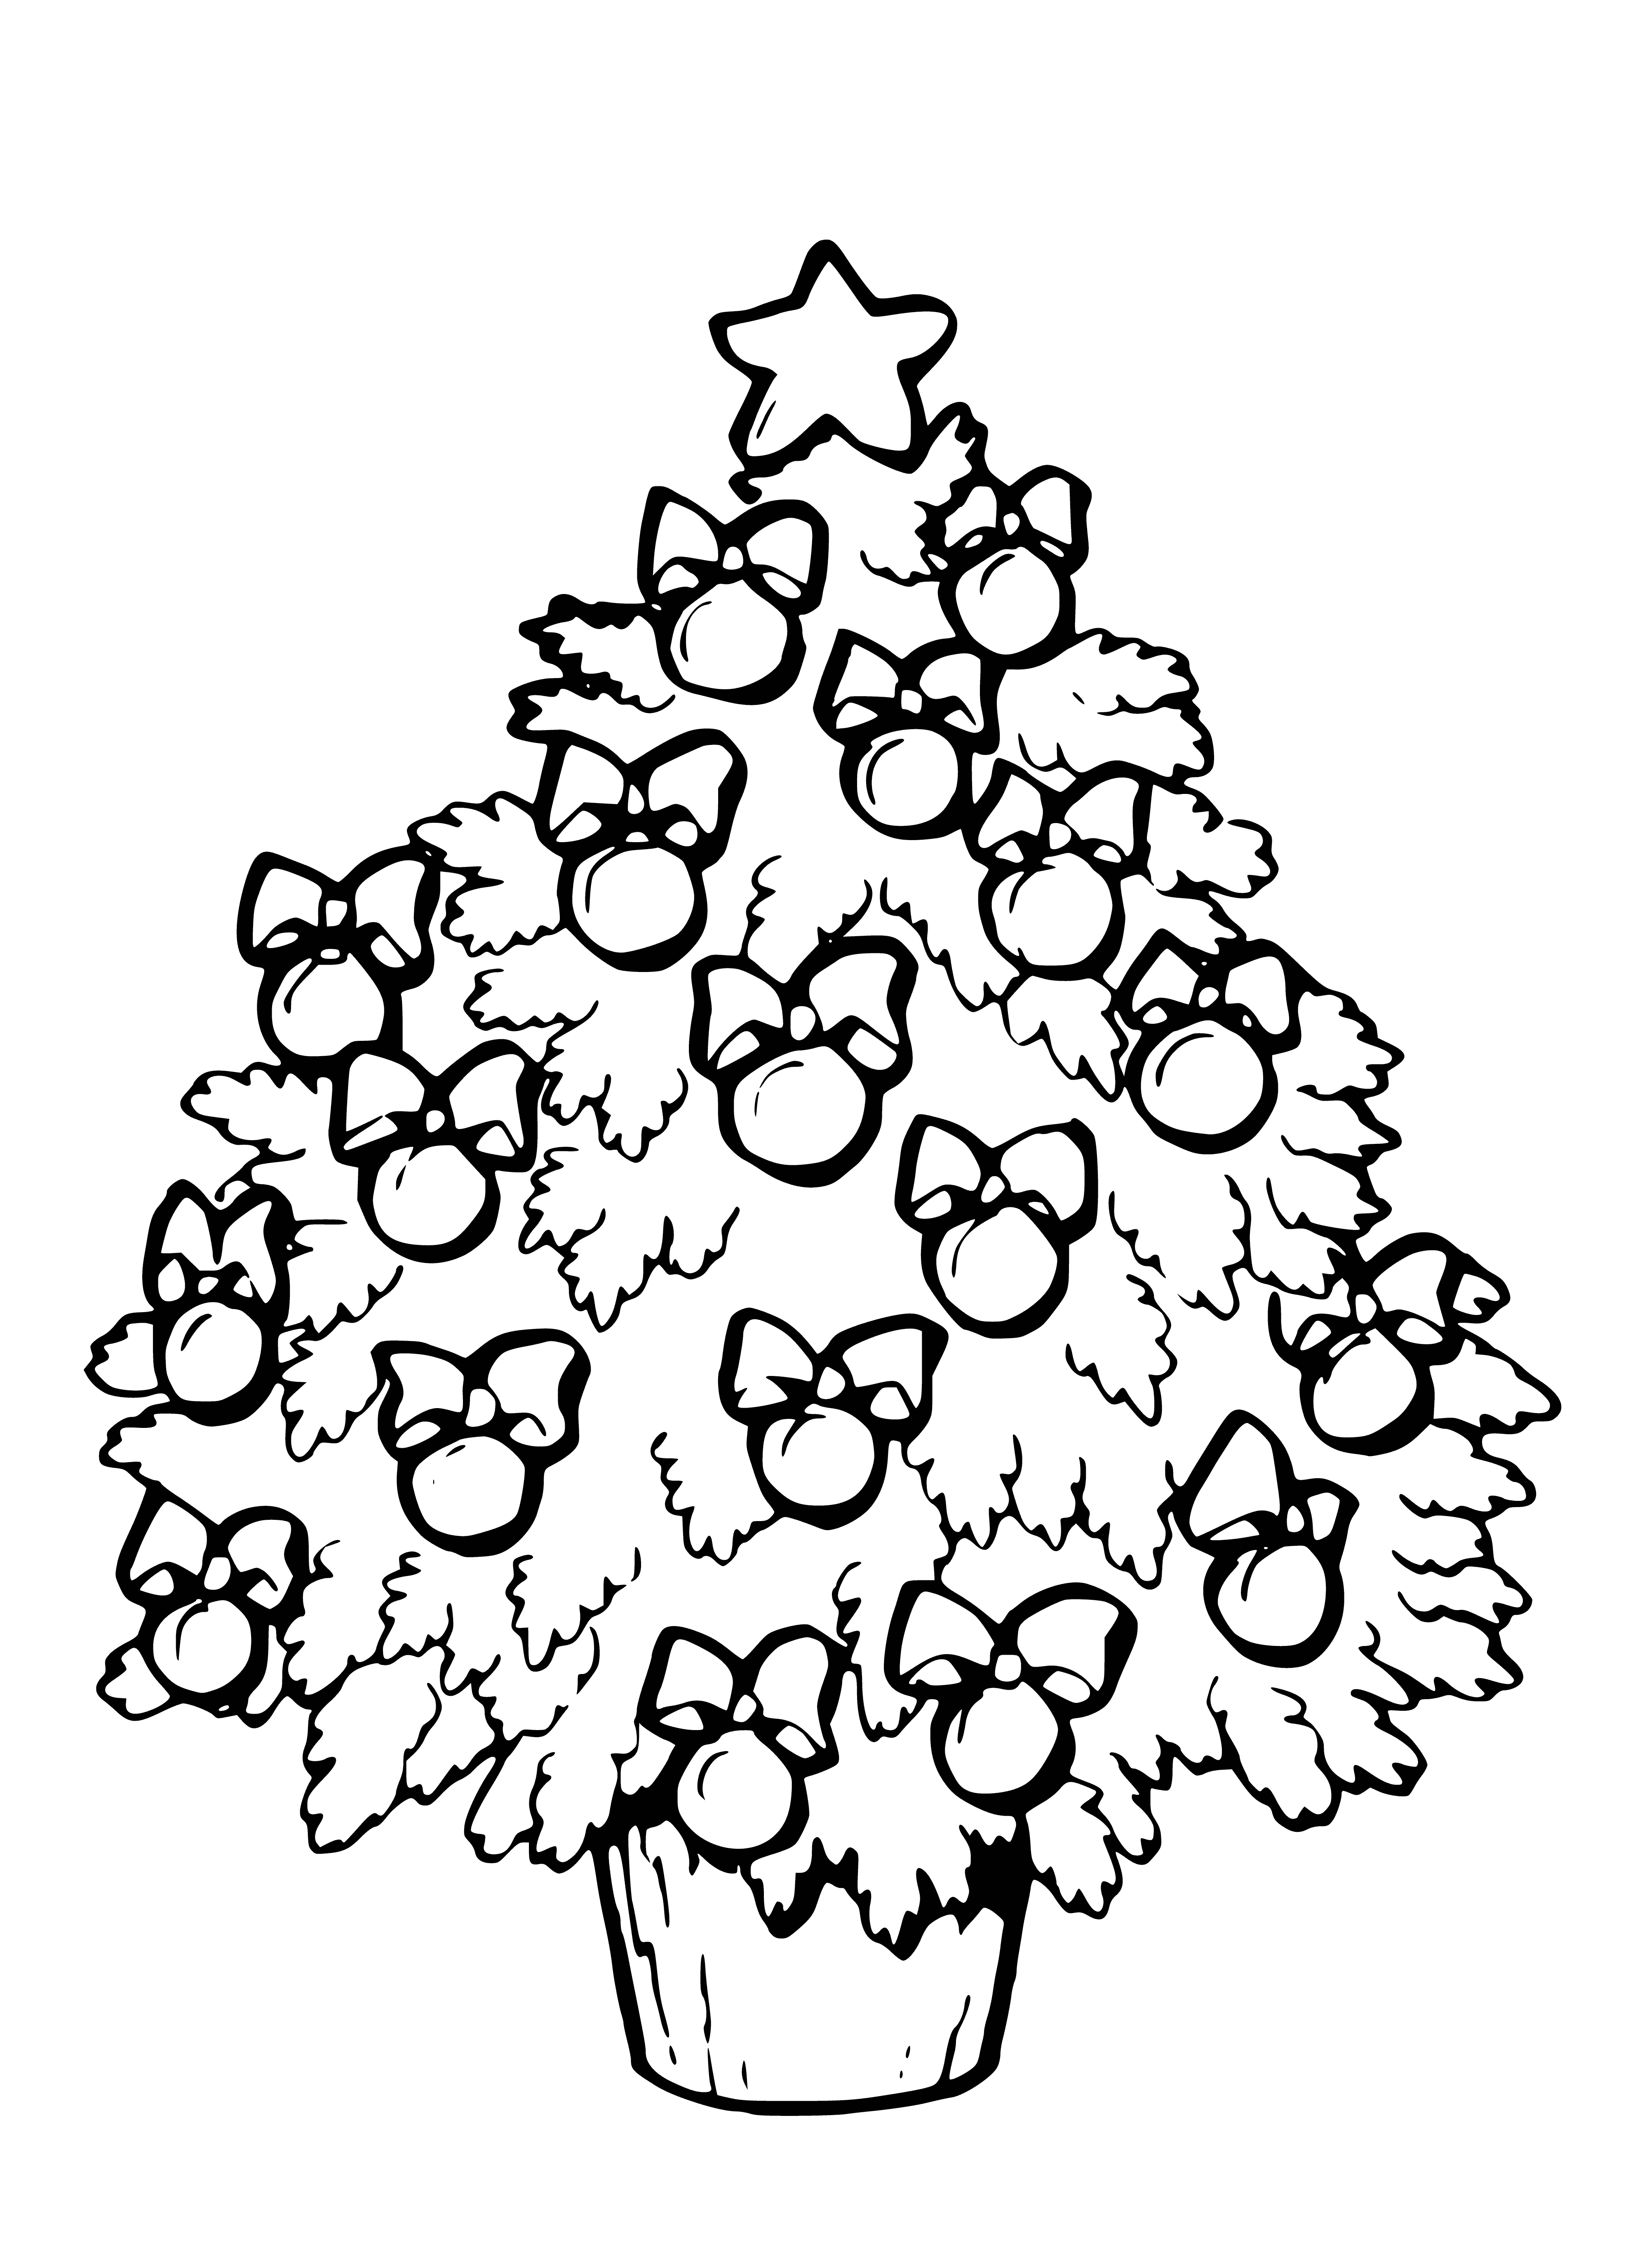 coloring page: Christmas tree in center of page, decorated with ornaments/lights & presents underneath.